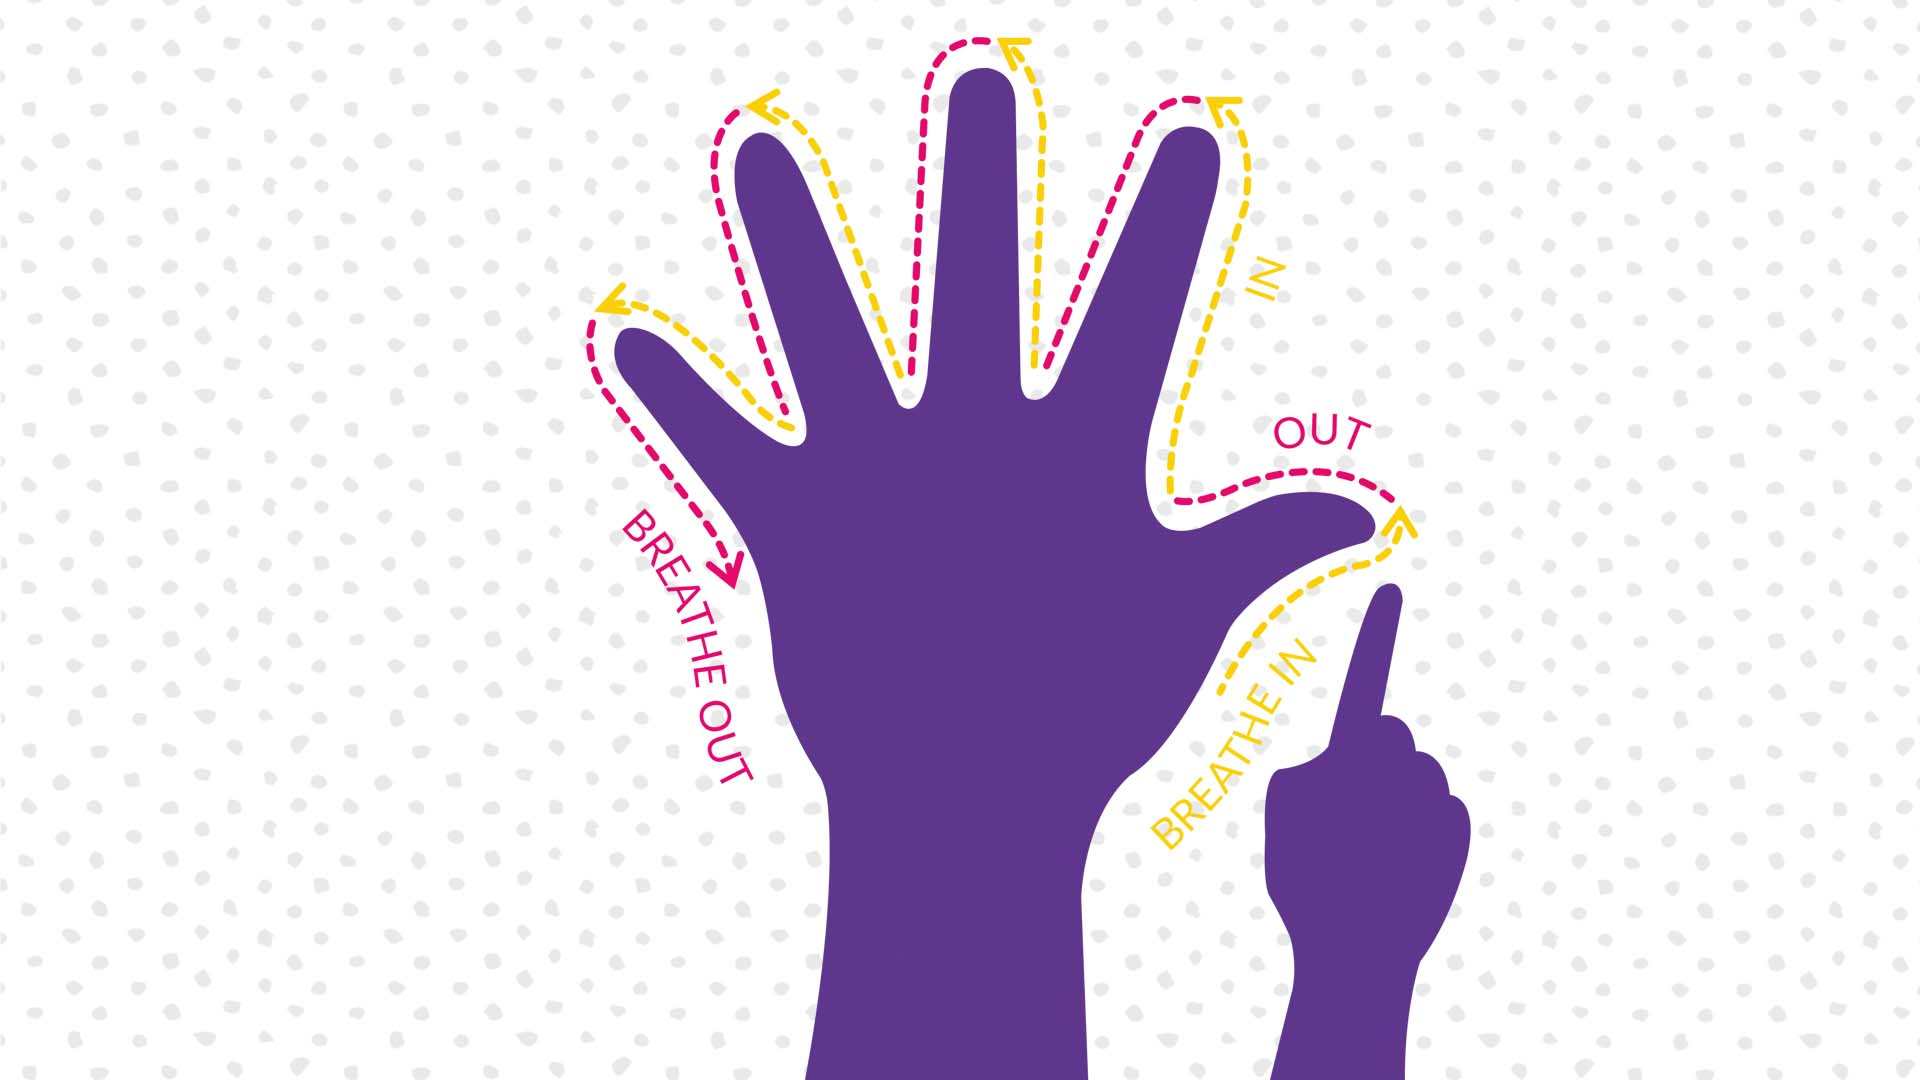 In the middle of the image is a purple hand with its fingers spread out. To the right of the hand is a smaller purple hand with its index finger pointing up. Around the bigger hand are dotted yellow and pink arrows following the shape of the fingers.